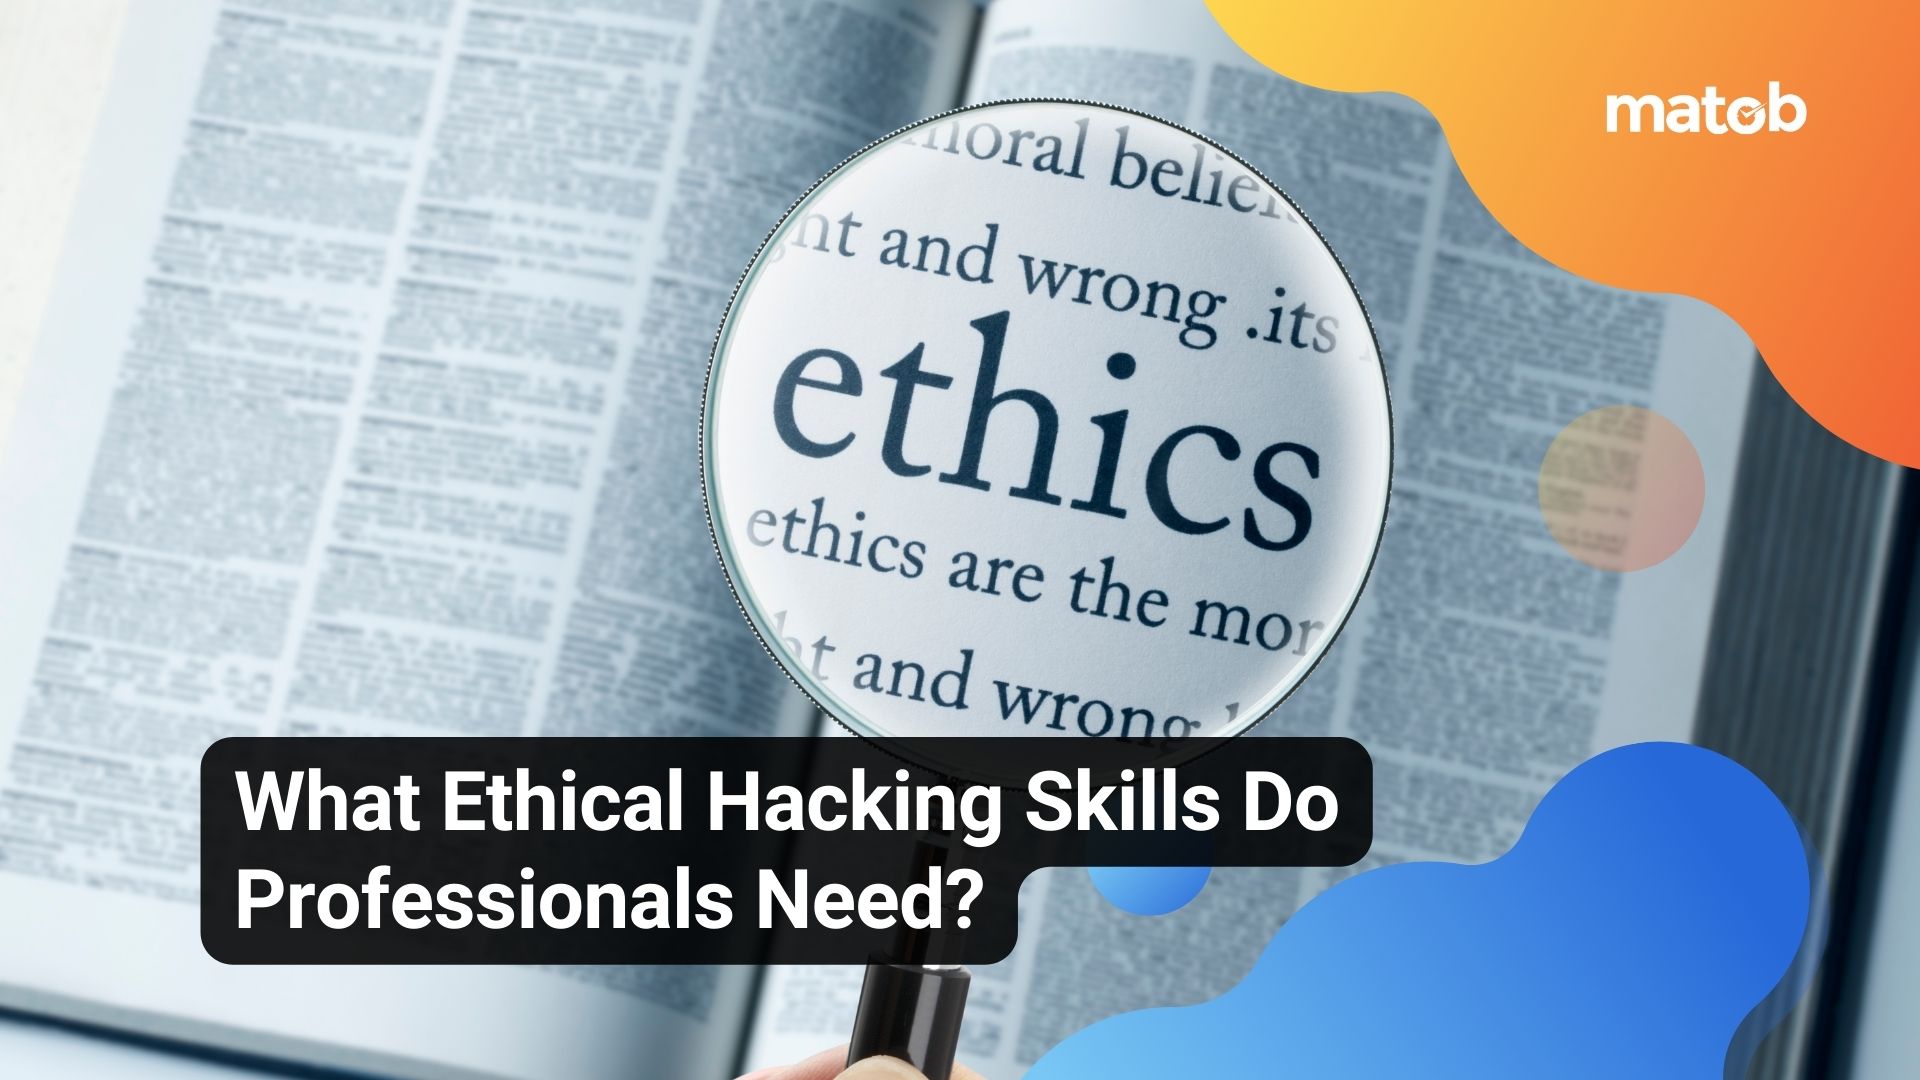 What Ethical Hacking Skills Do Professionals Need?